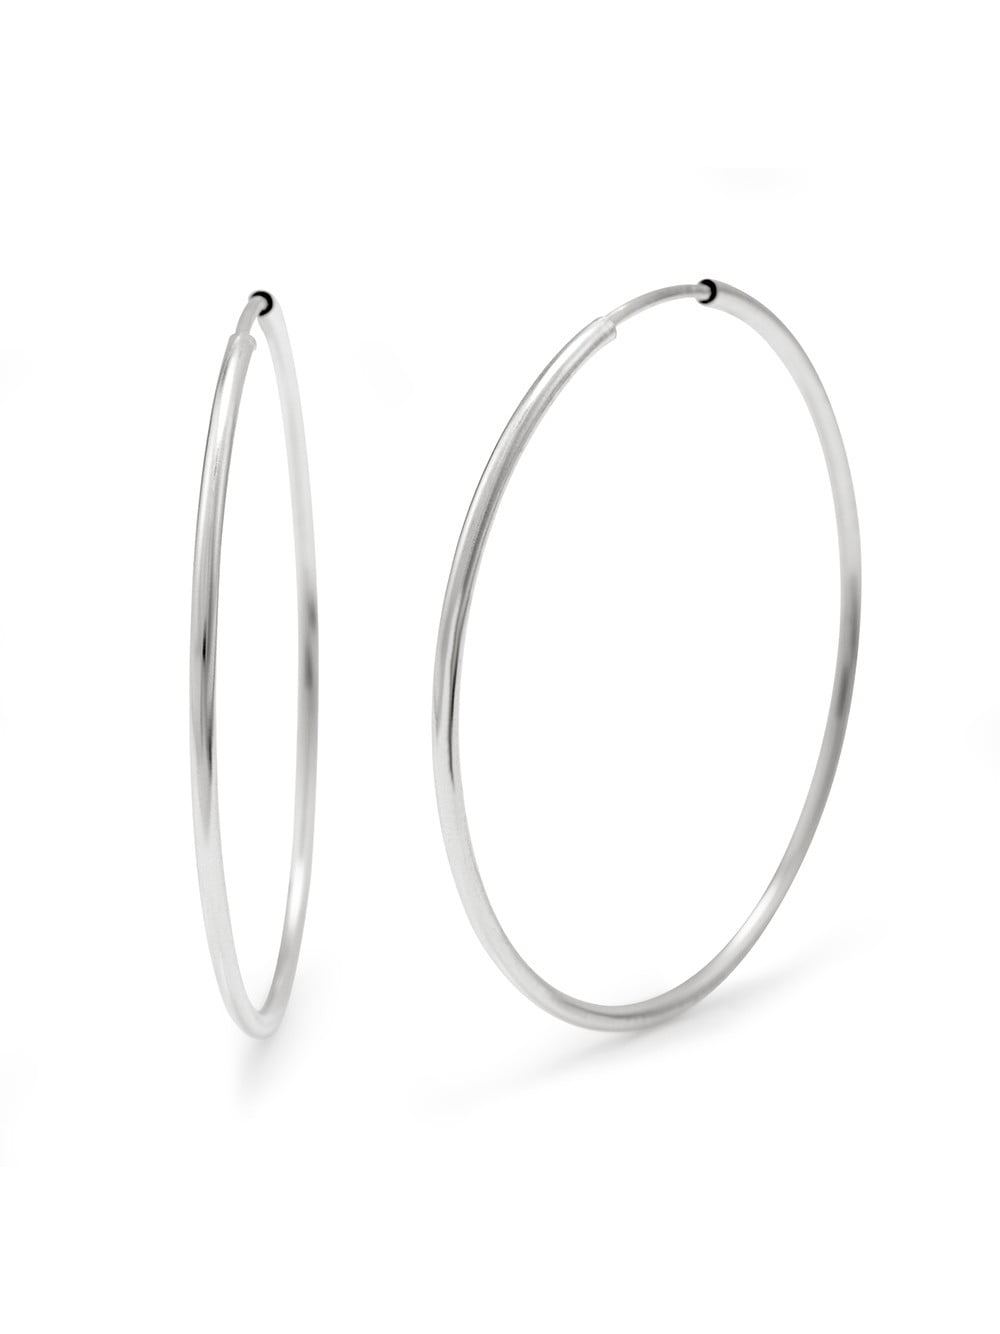 Sterling Silver Continuous Hoop Earrings - 1.5 inch